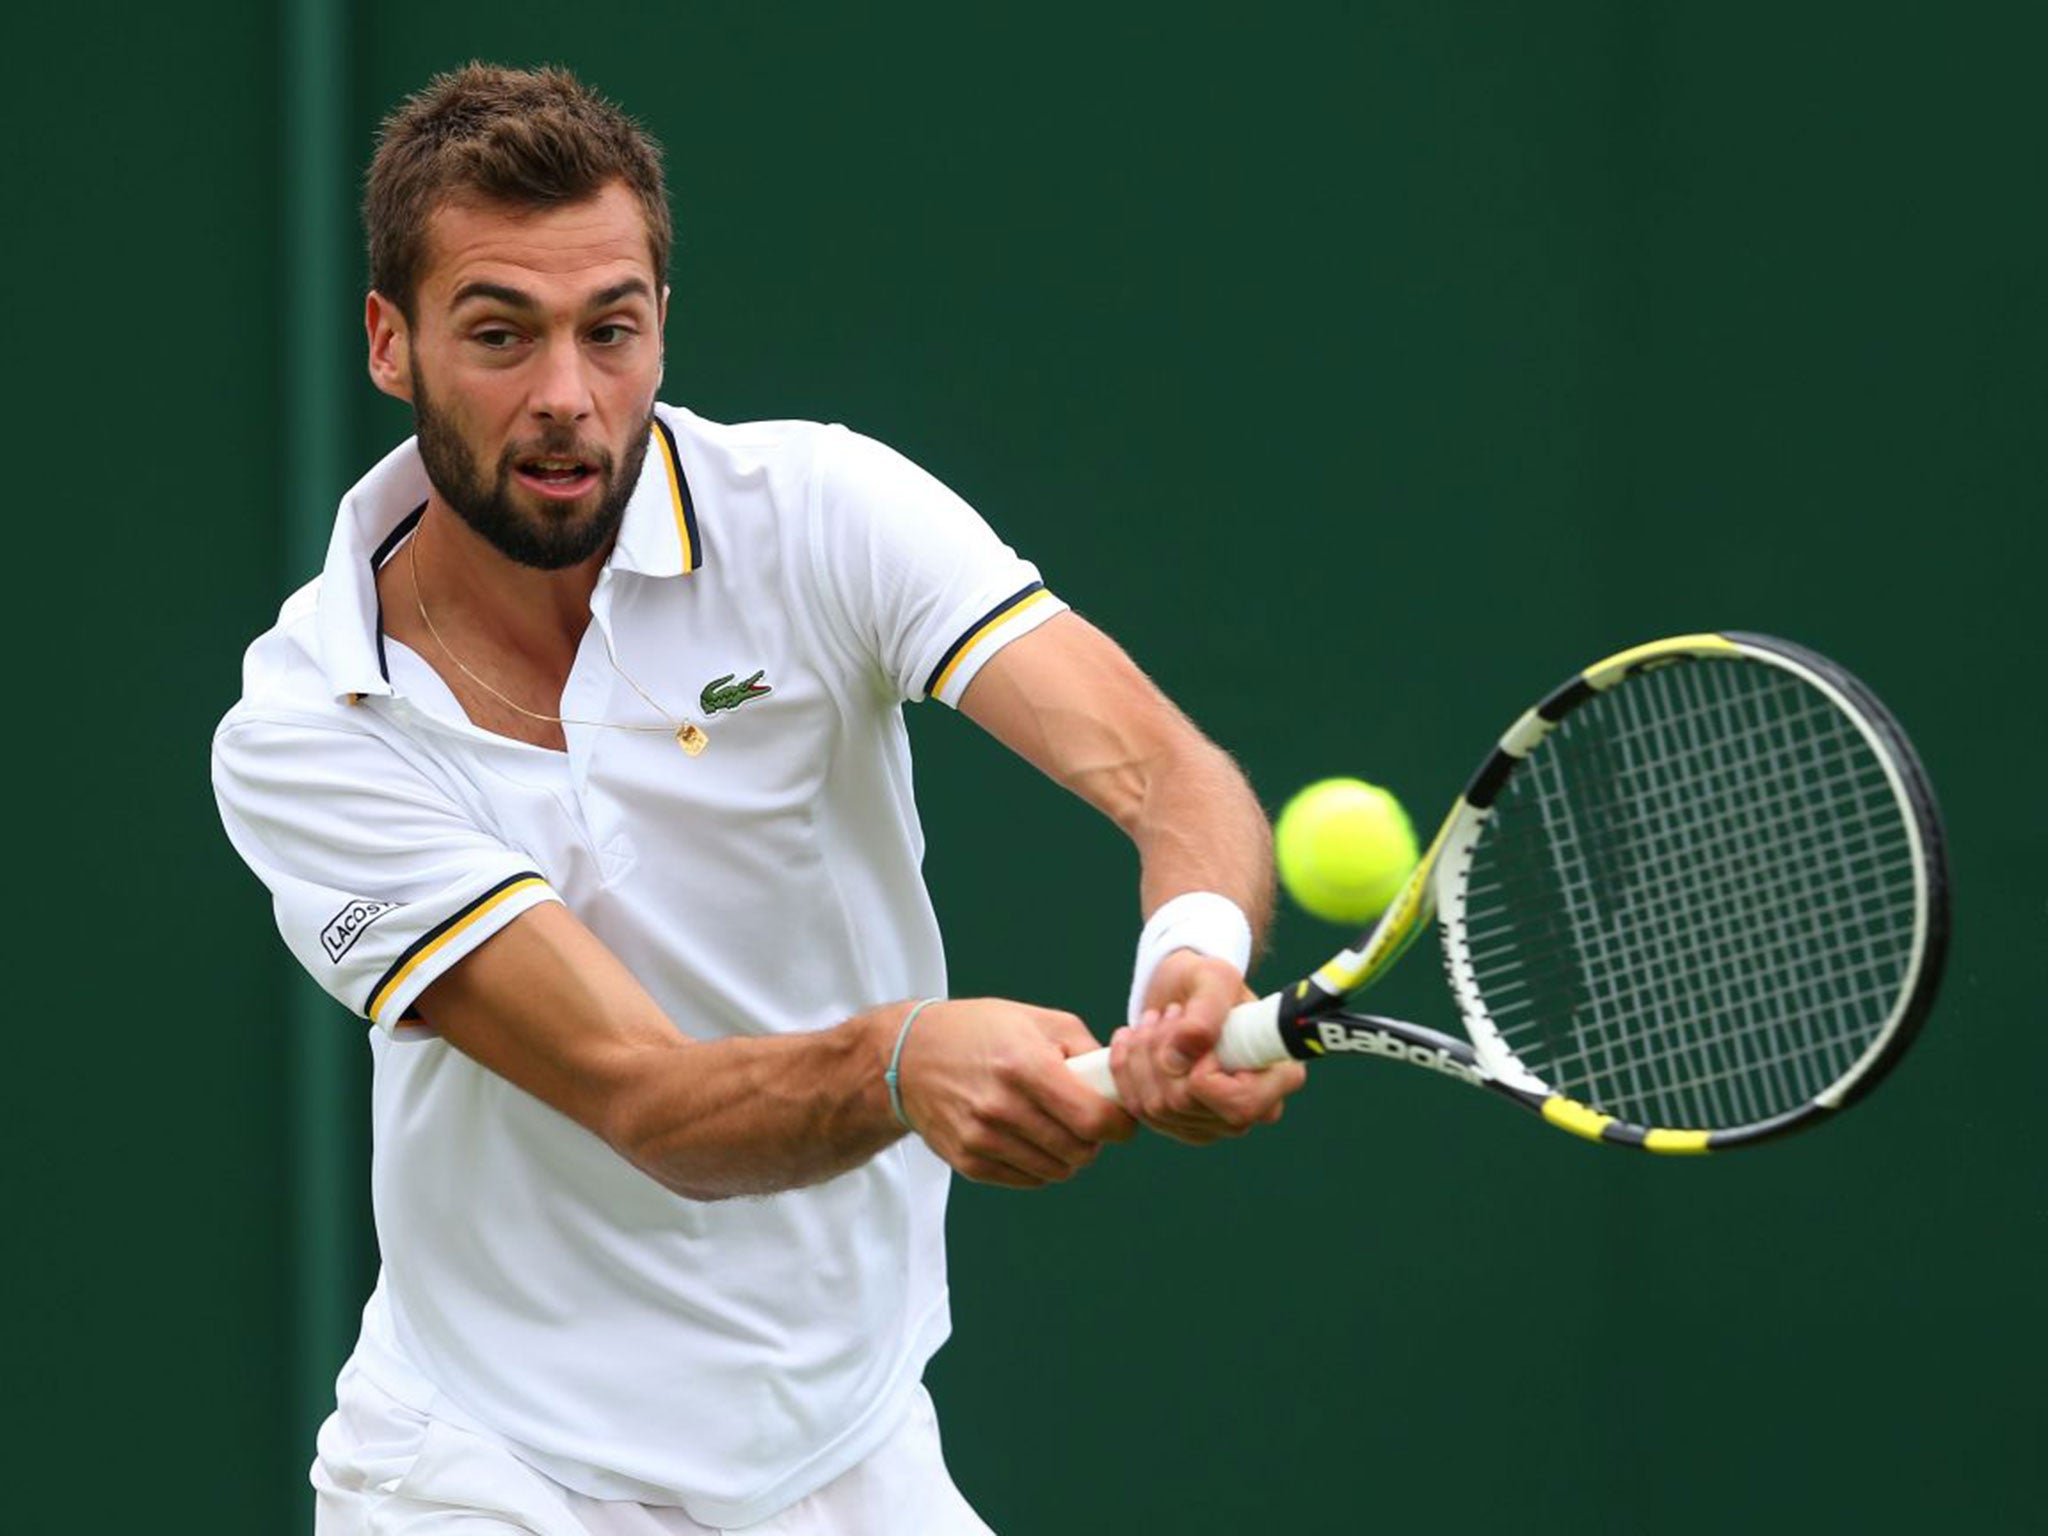 Benoît Paire was defeated by Lukas Rosol in the singles on Tuesday